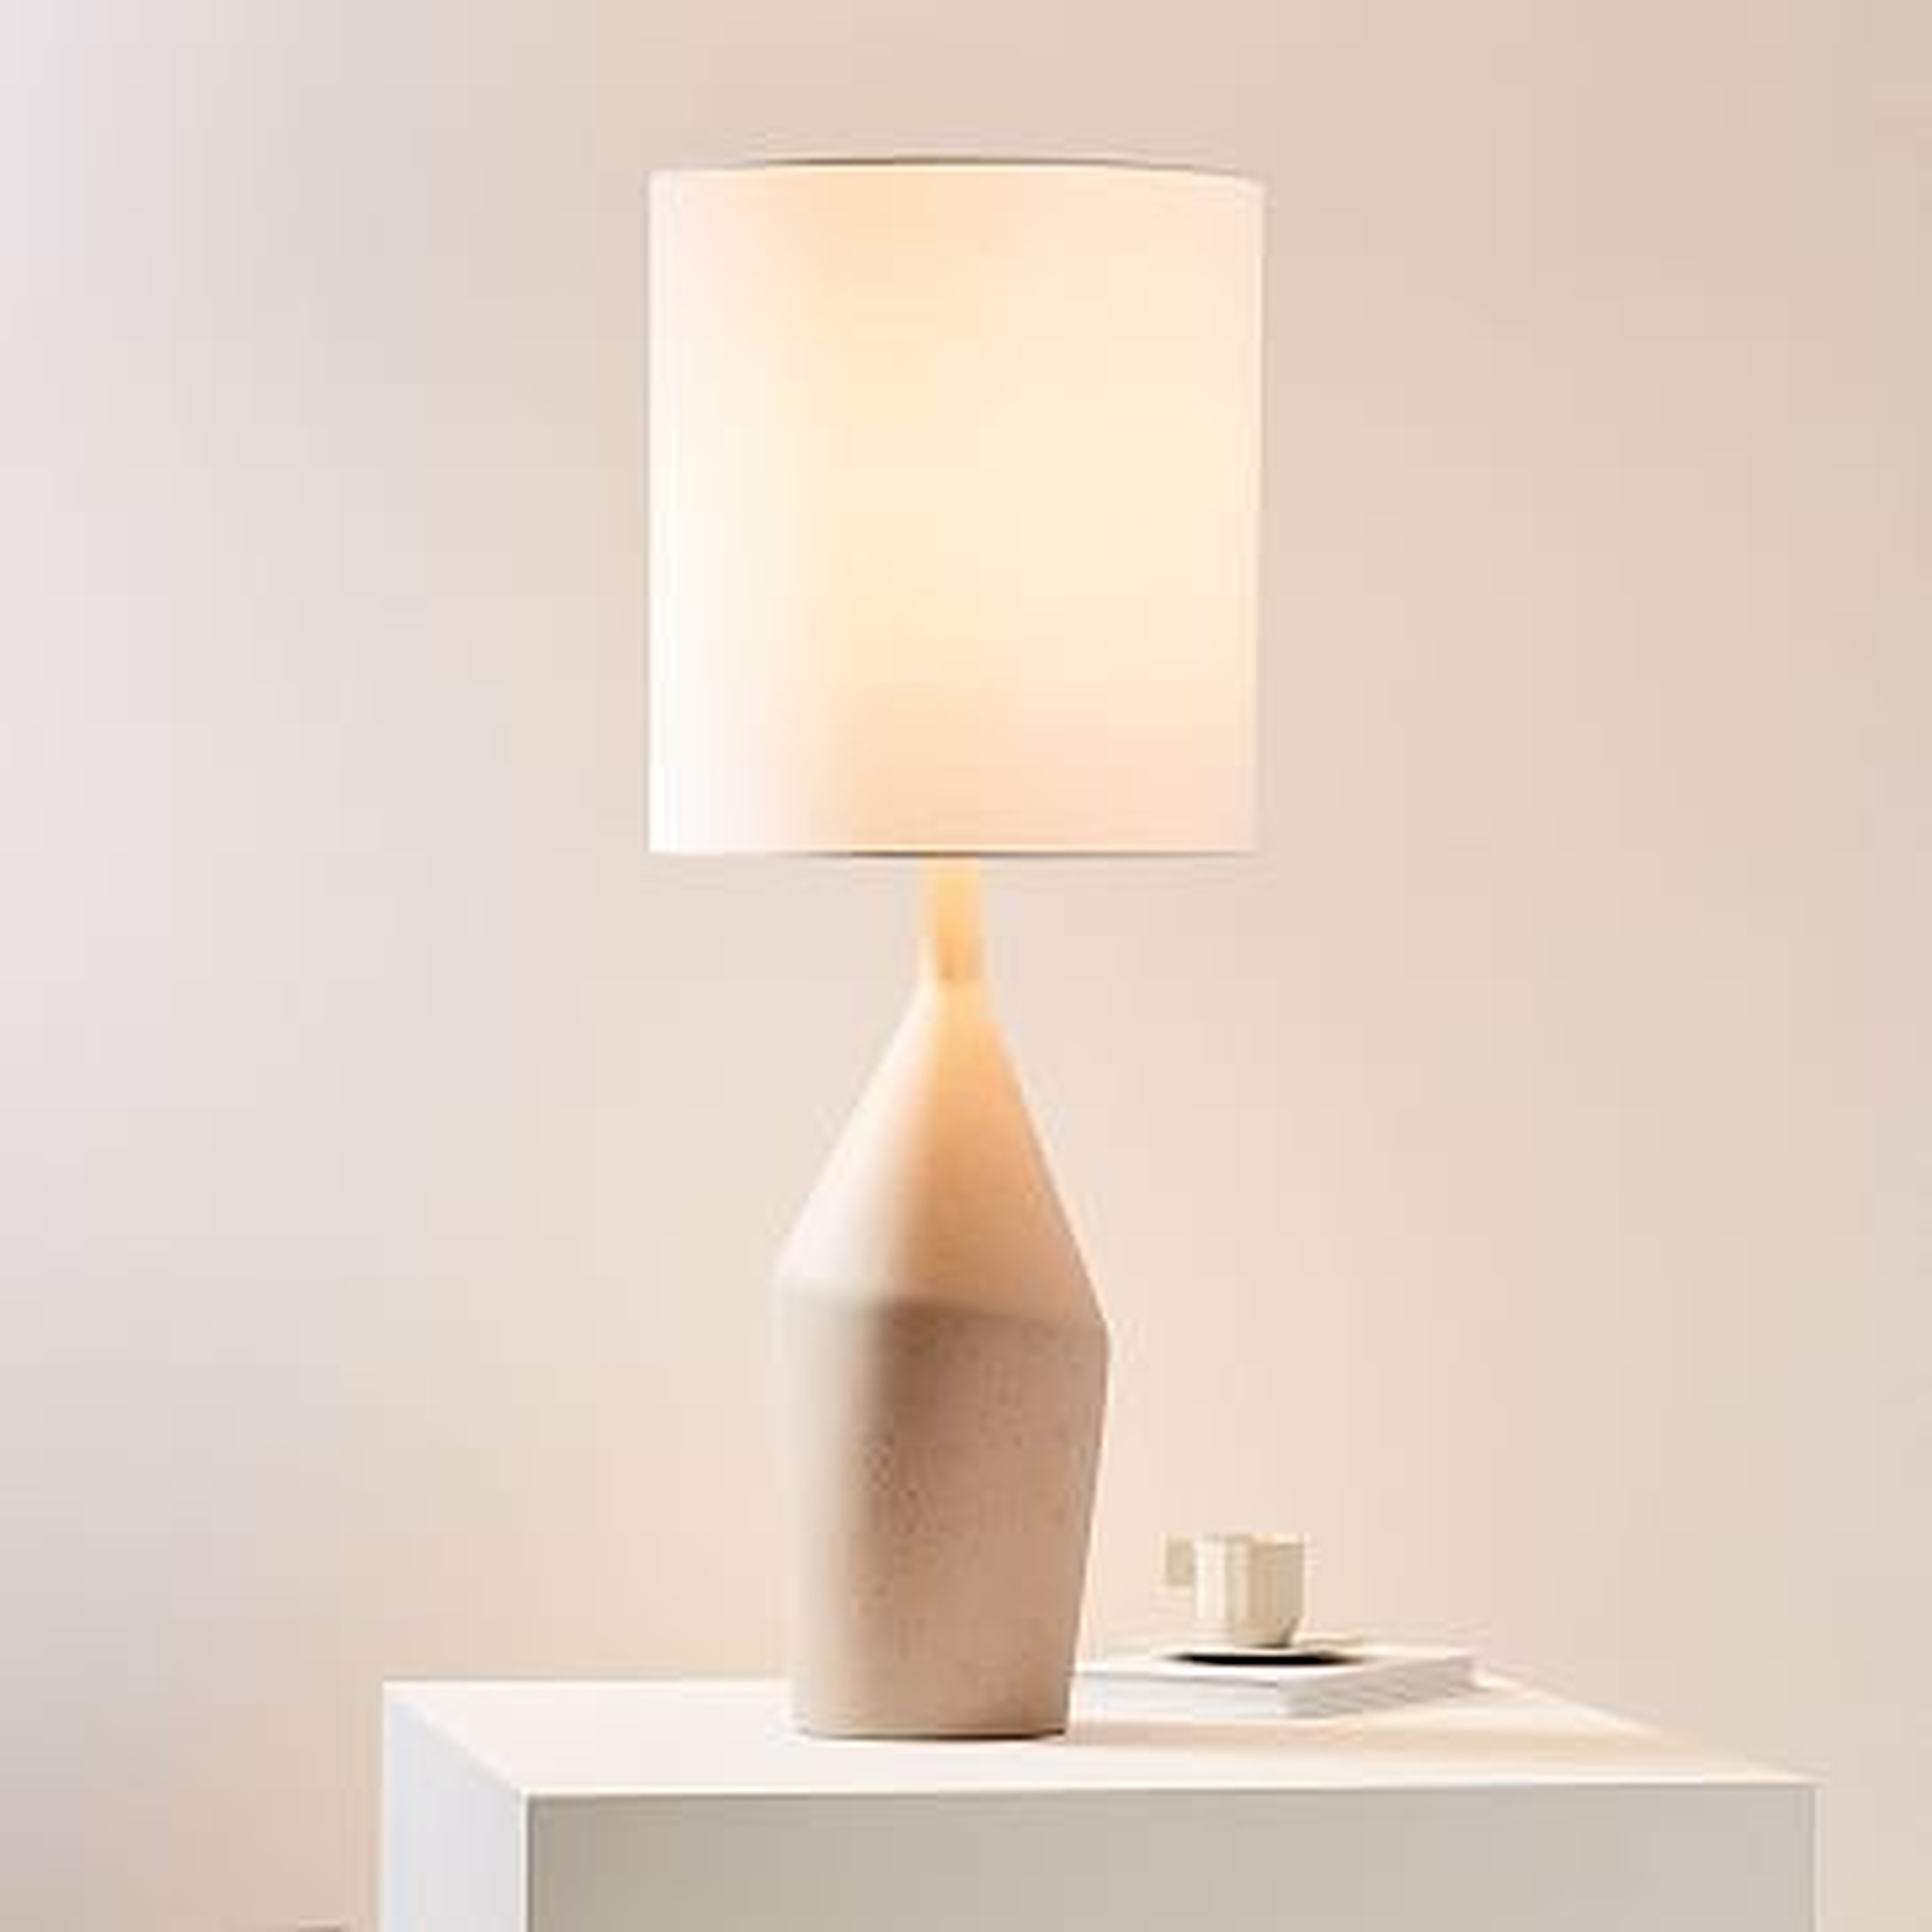 Asymmetry Ceramic Table Lamp, Large, Speckled Stone - West Elm